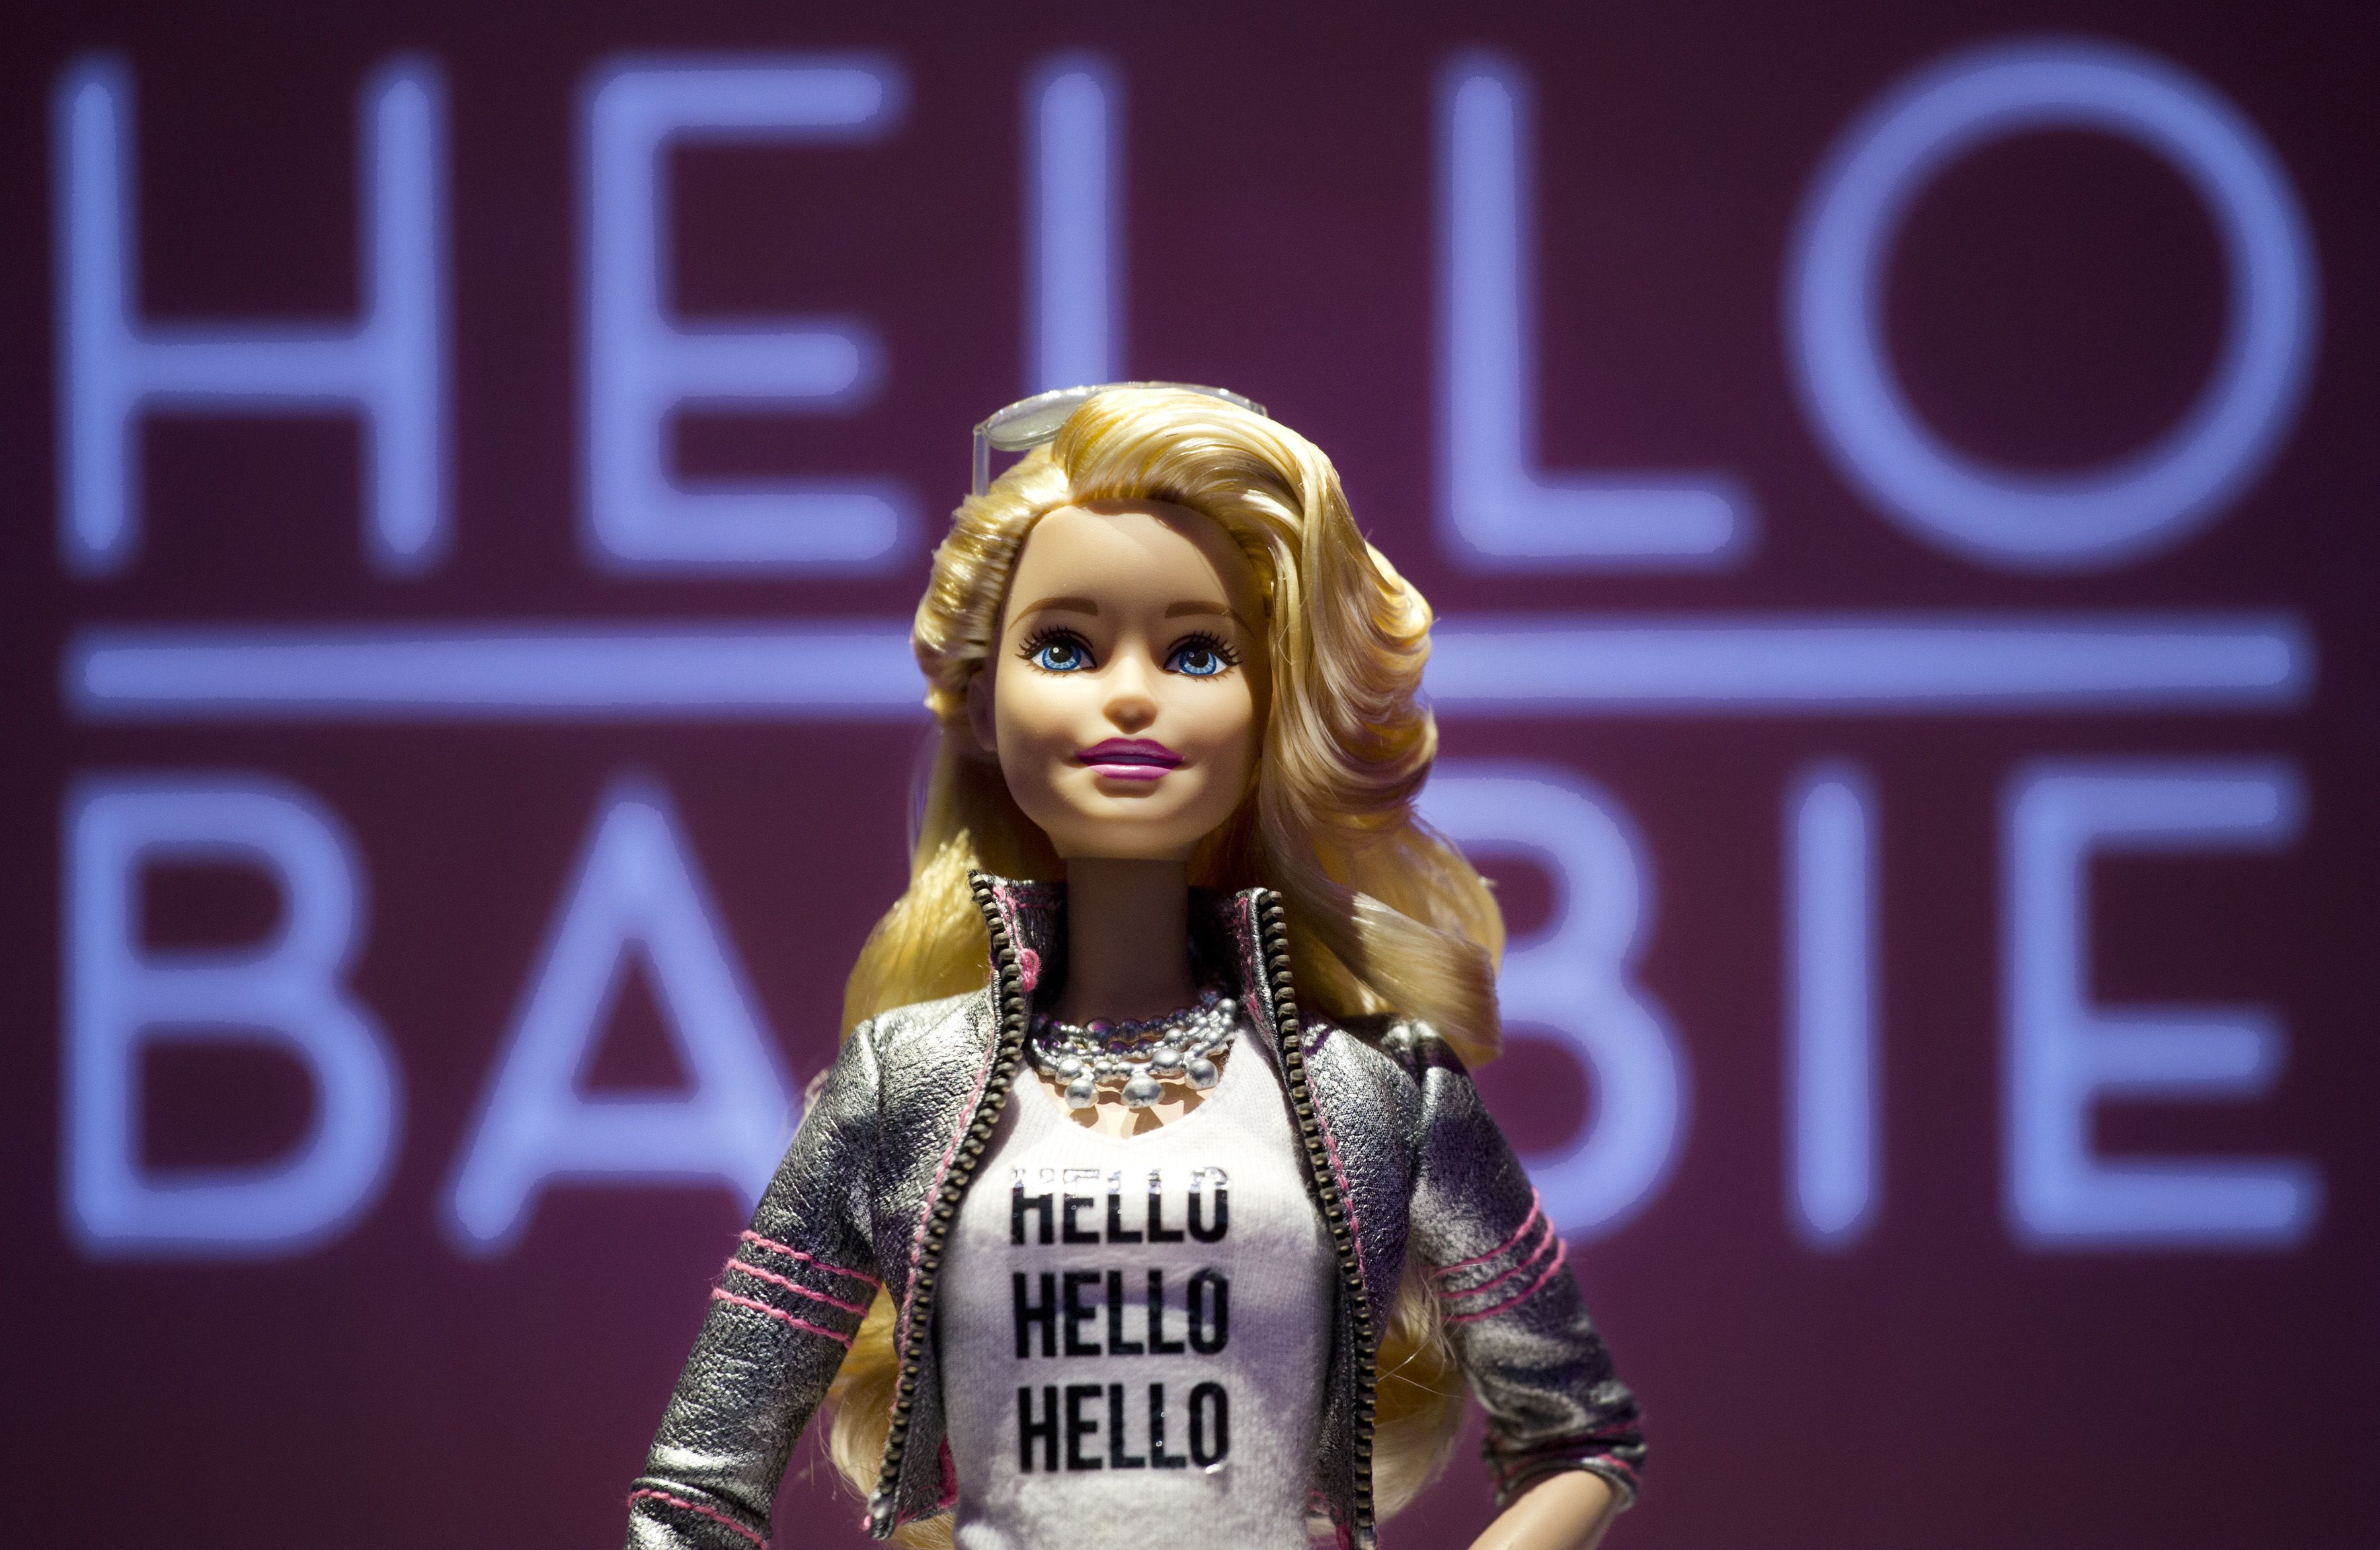 Barbie California Porn - Is Hello Barbie eavesdropping on your kids? | CNN